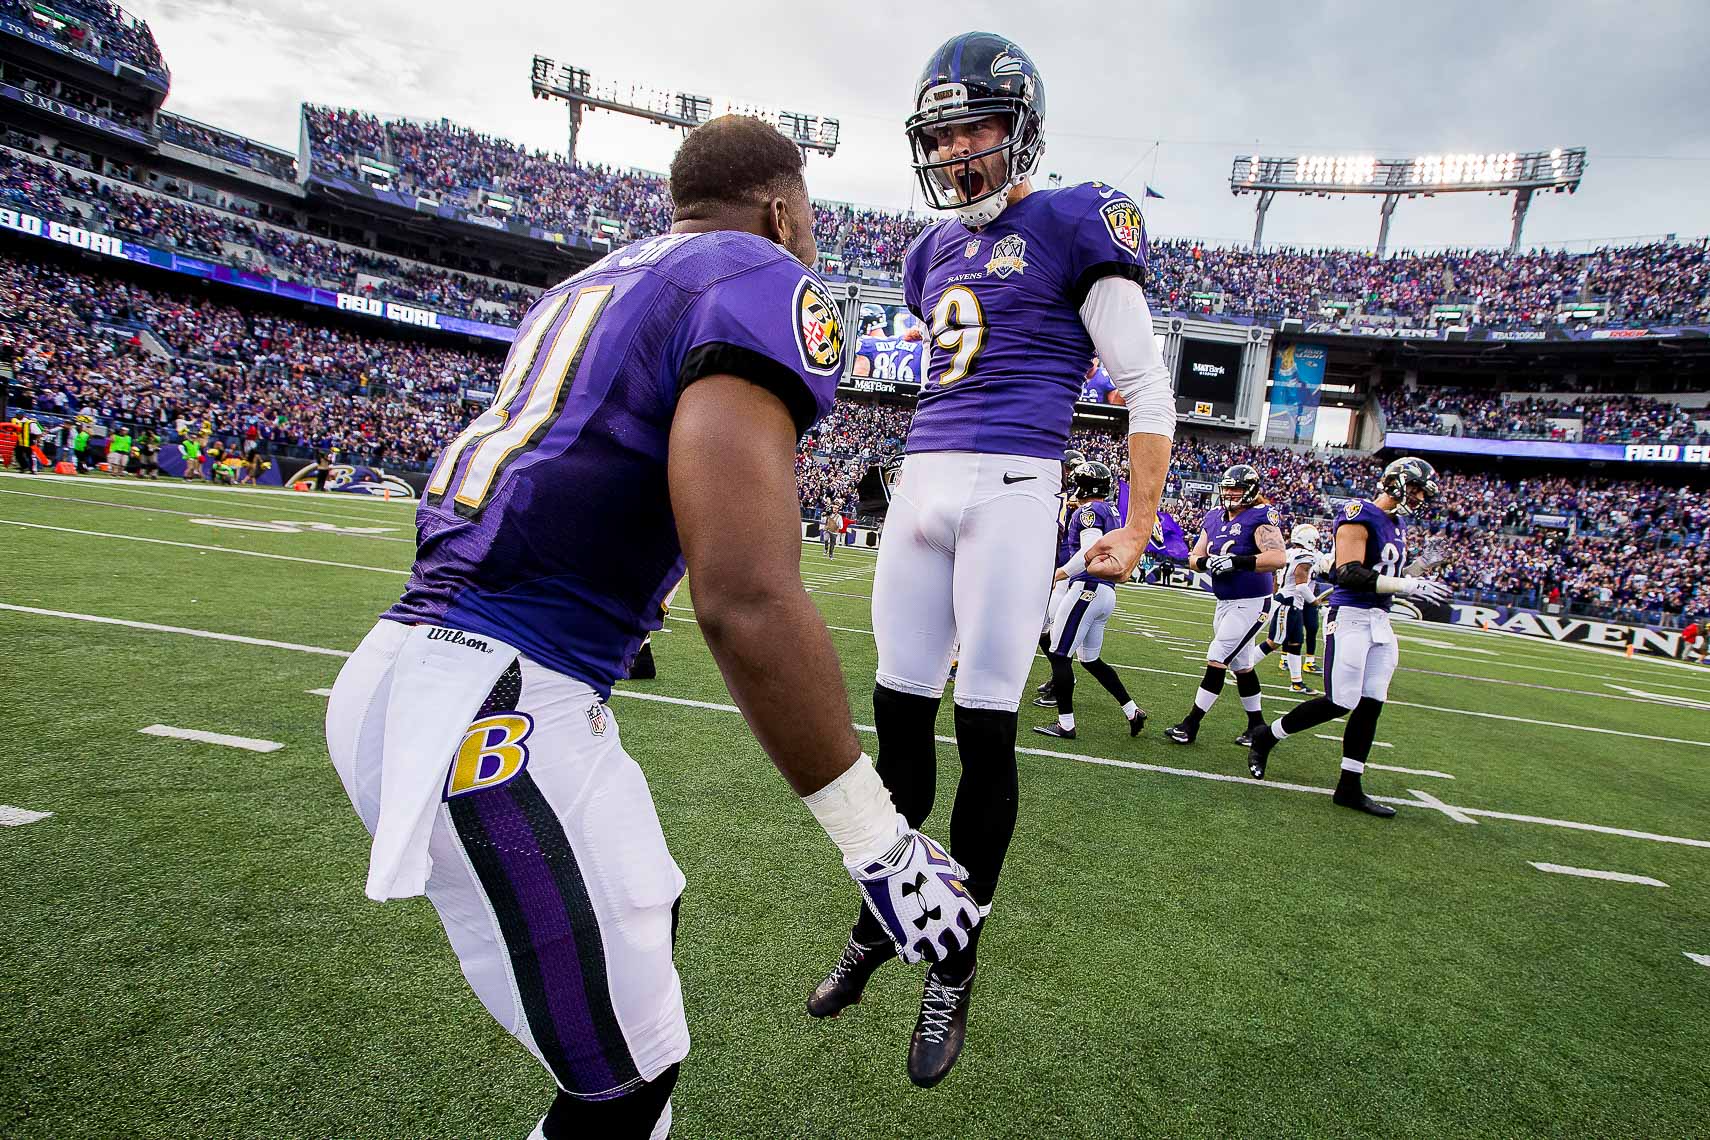 NFL football team Baltimore Ravens photographed in NIKE football uniforms by commercial advertising sports photographer in baltimore maryland showing sports action photography